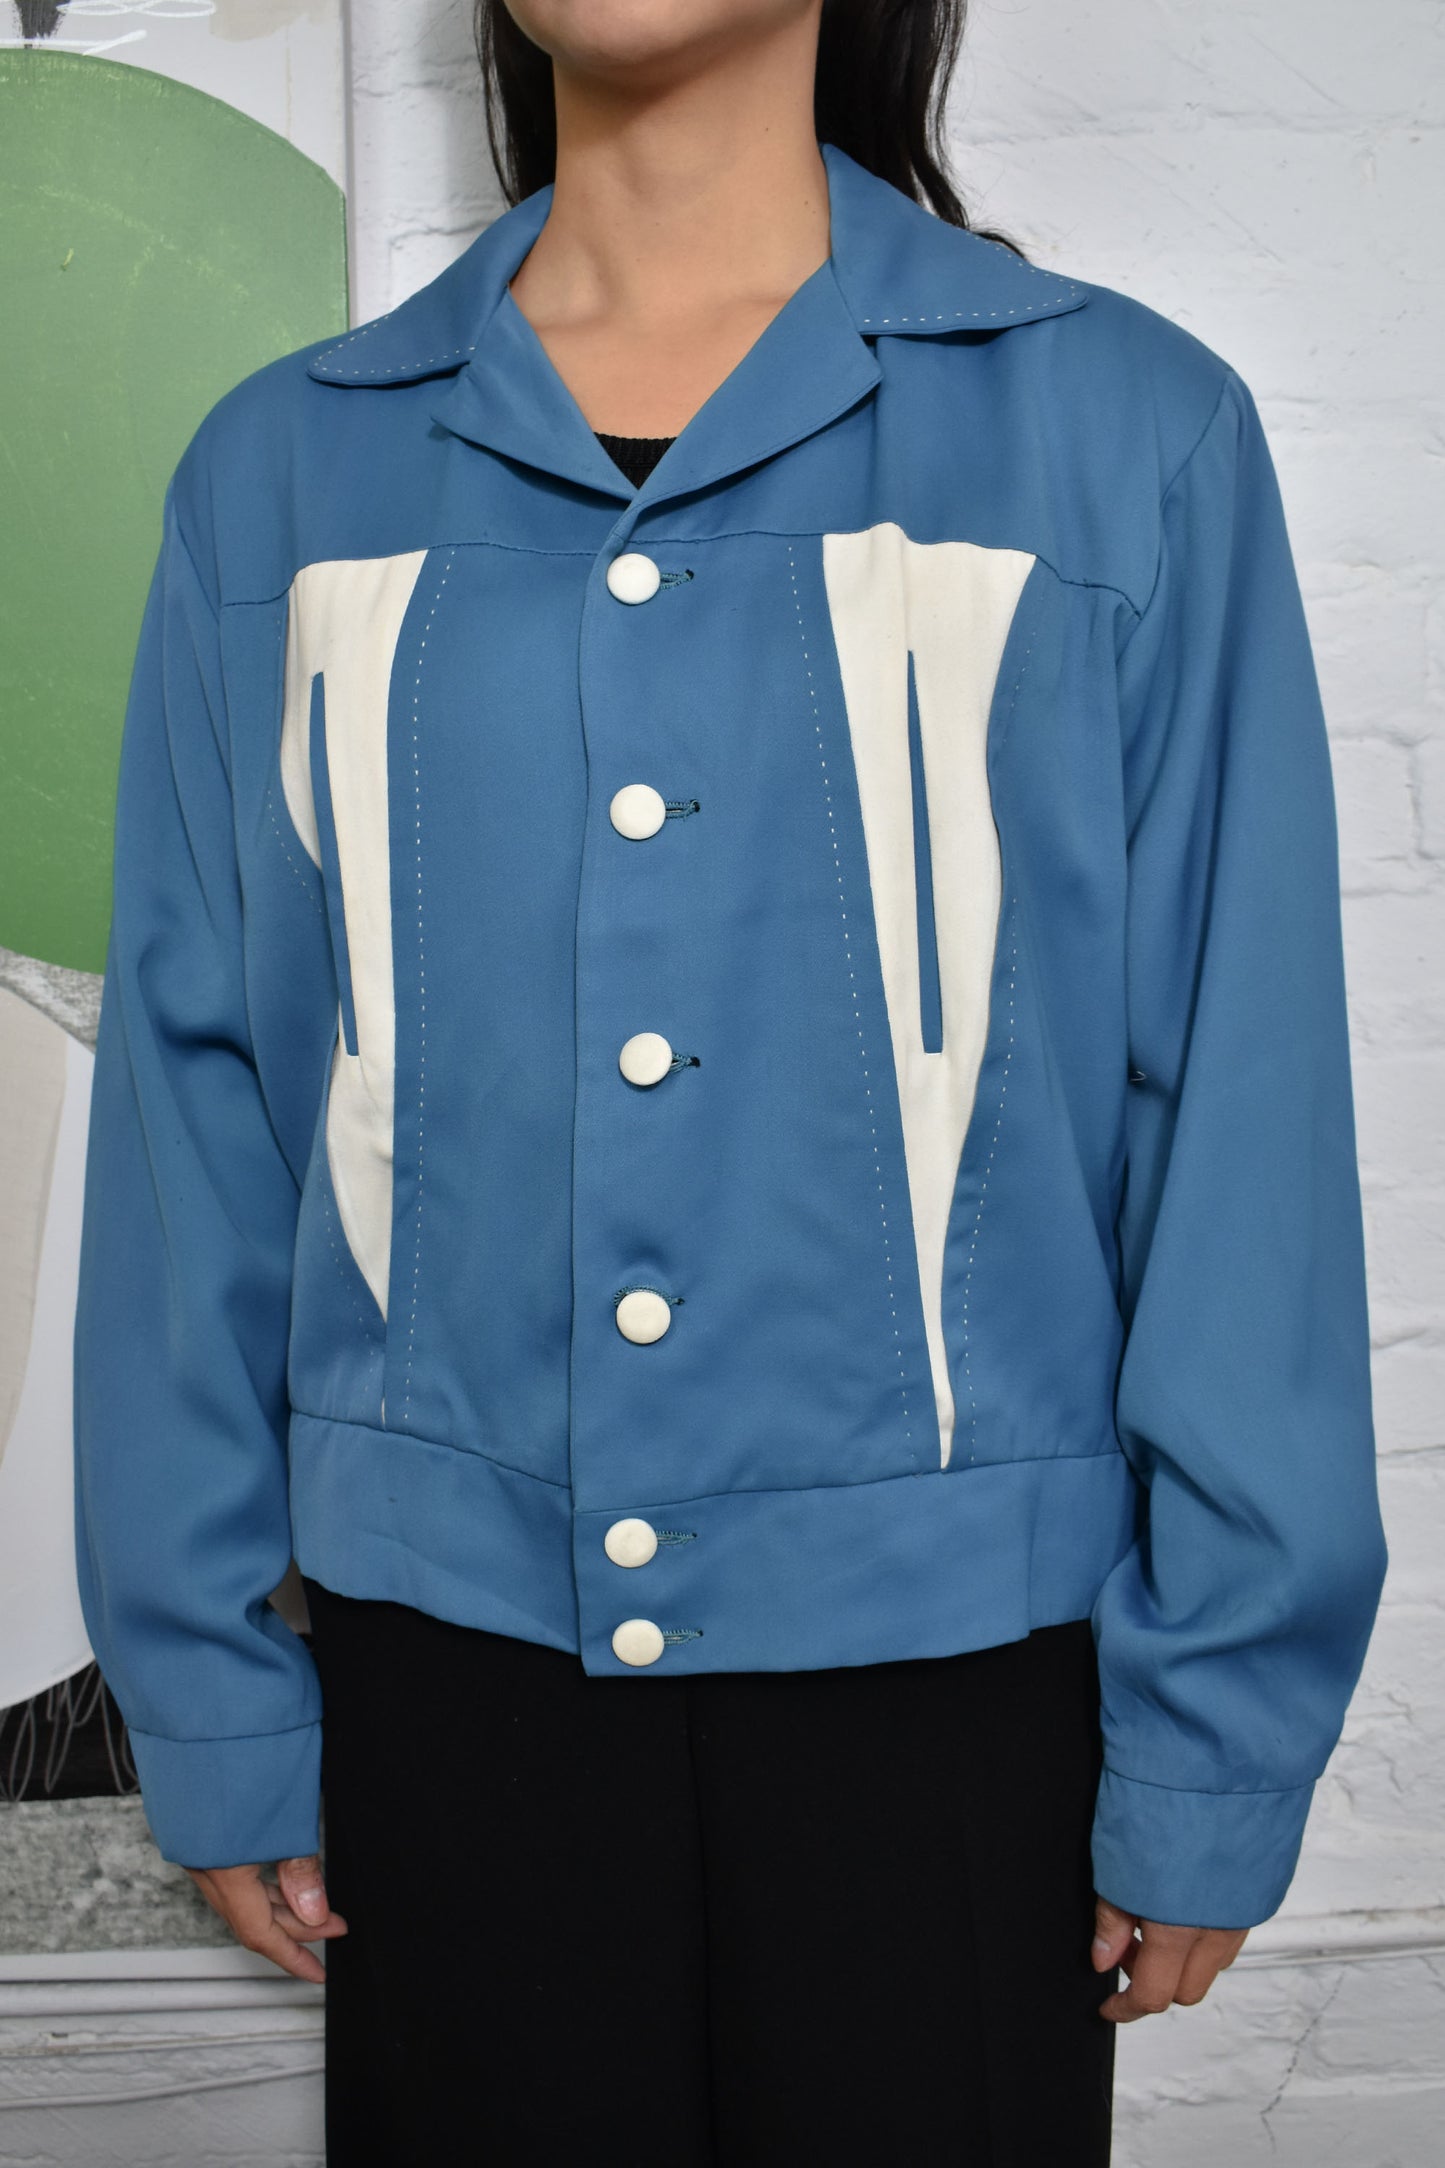 Vintage 50s "Casuals by Campus" Blue Light Jacket